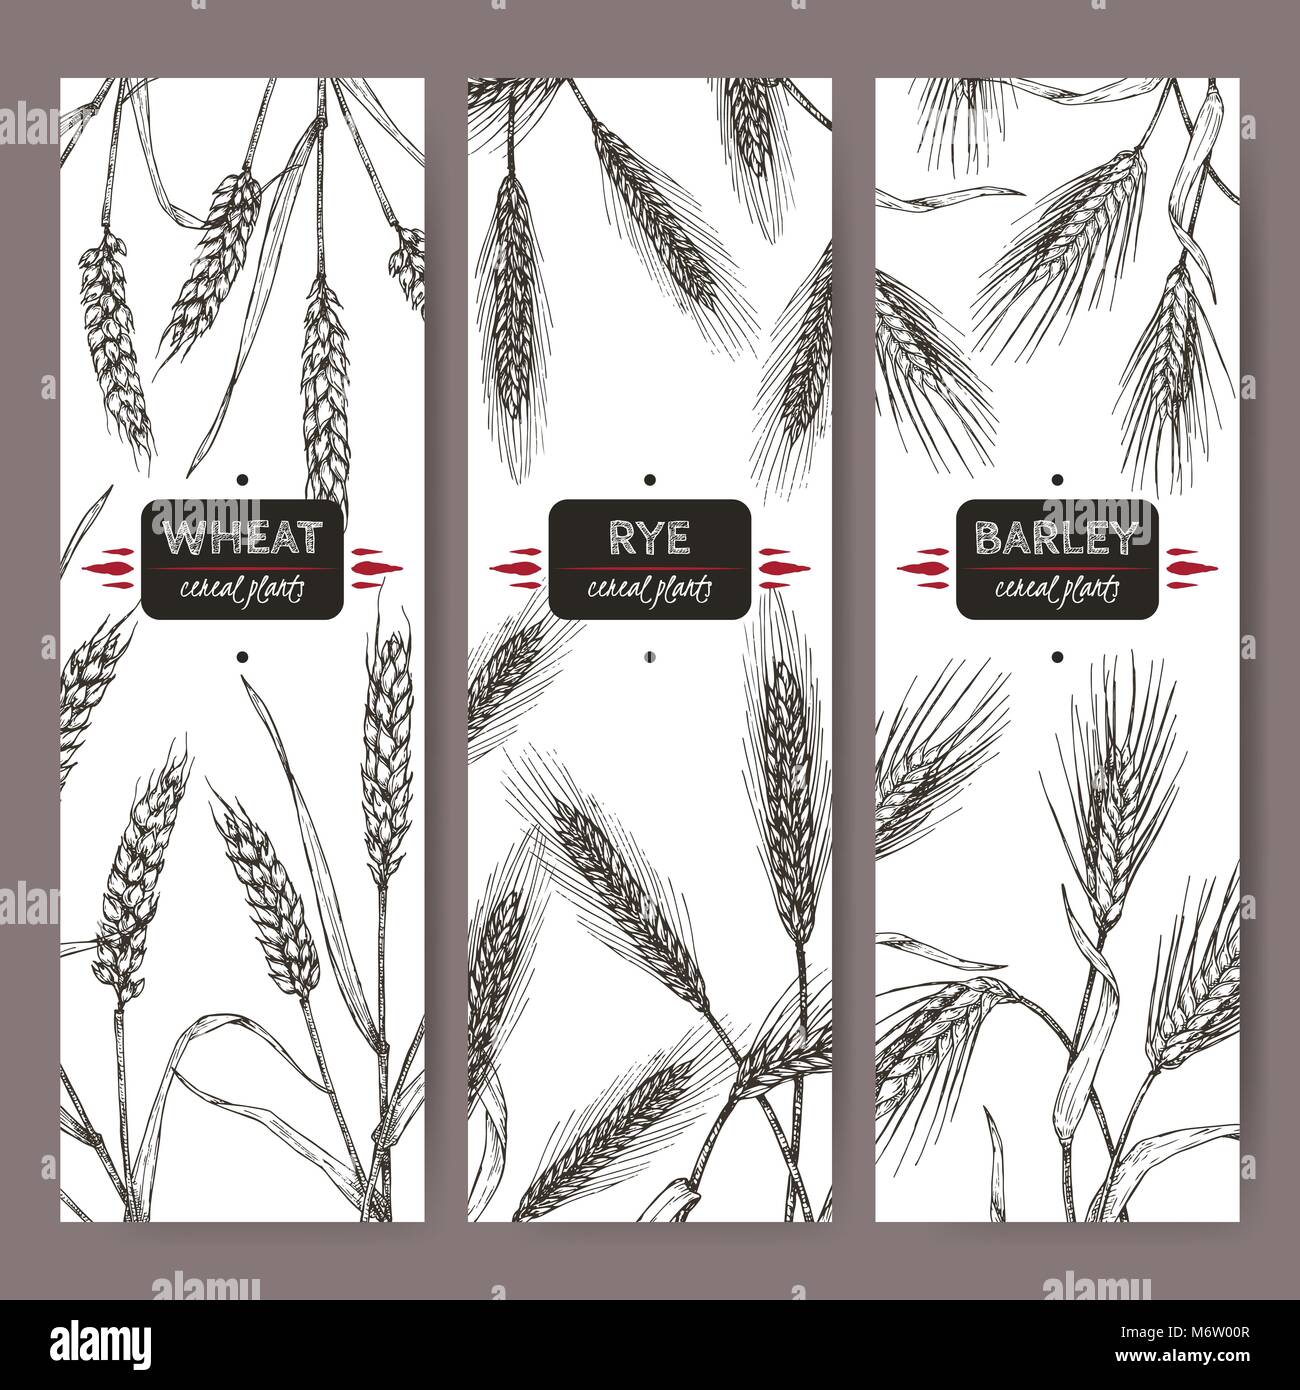 Set of three labels with bread wheat, rye and barley sketch. Cereal plants collection. Stock Vector